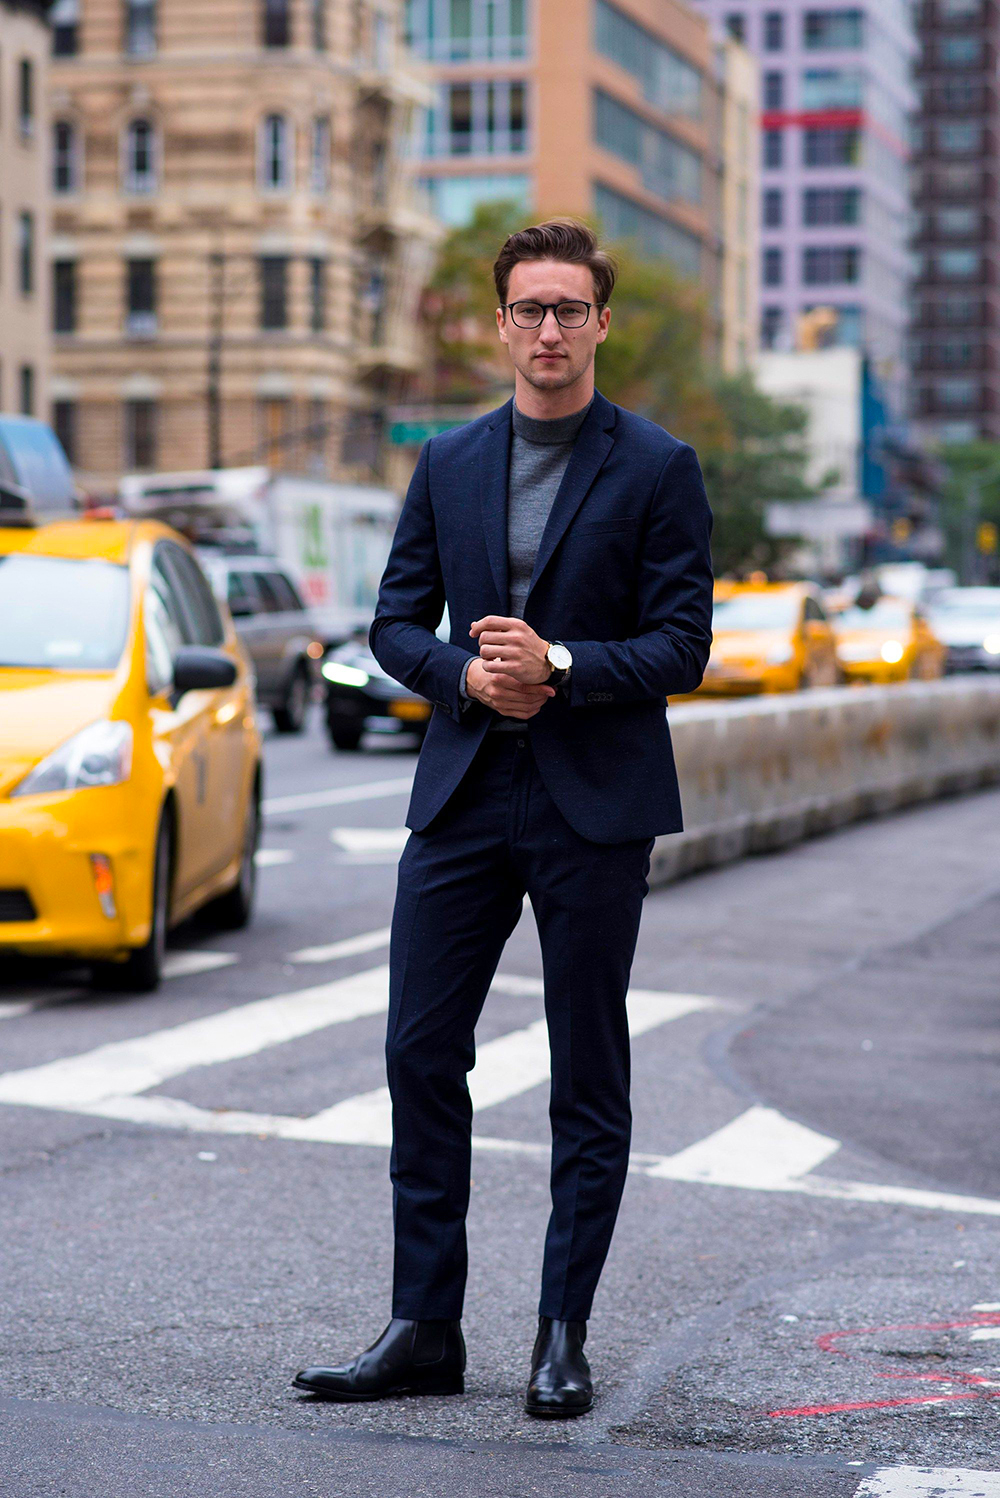 Navy suit, charcoal turtleneck, and black Chelsea boots outfit